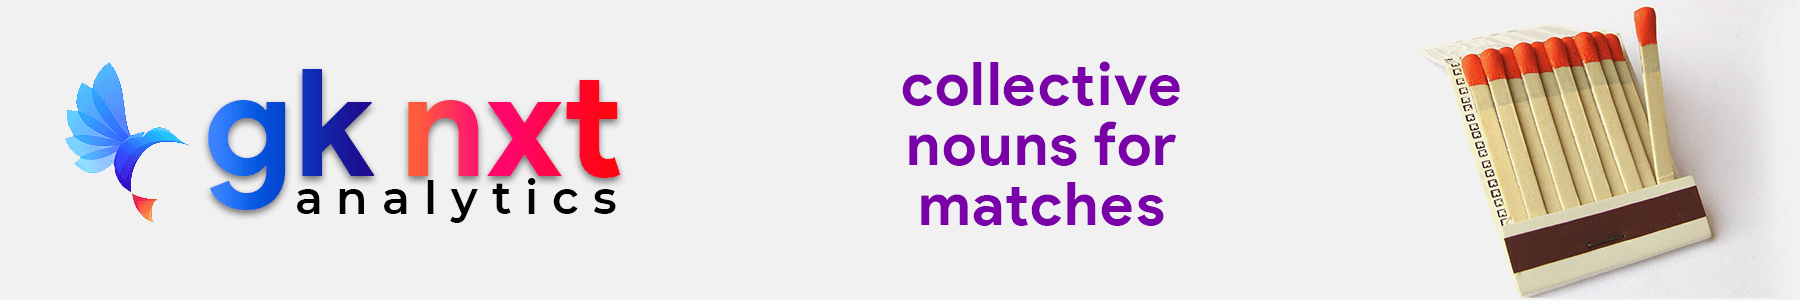 collective nouns for matches